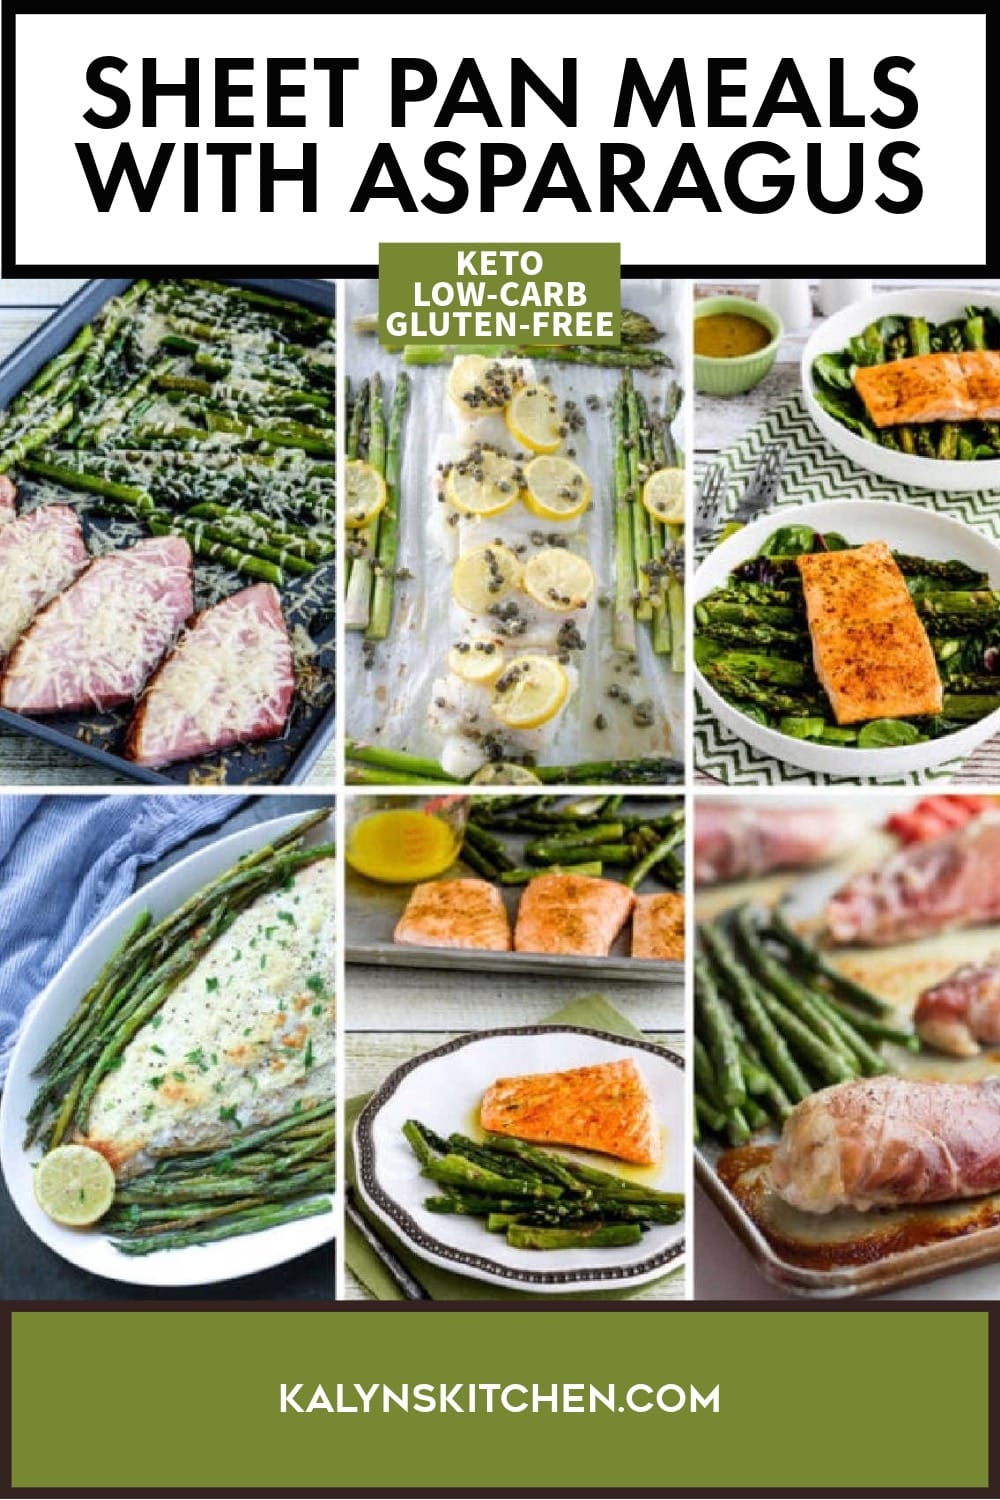 Pinterest image of Sheet Pan Meals with Asparagus